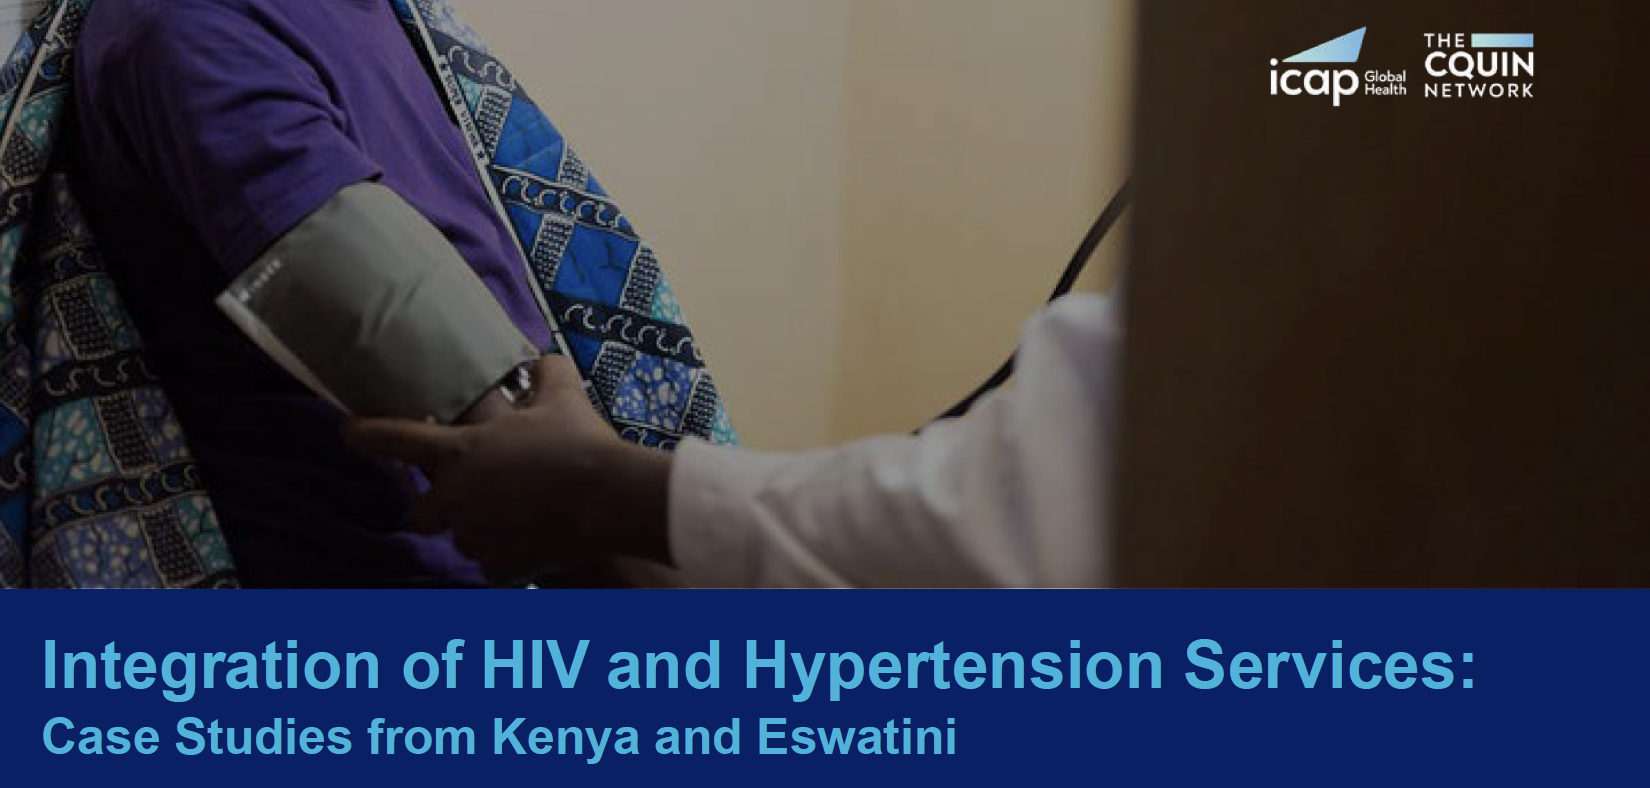 CQUIN panel lessons from HIV-hypertension integration